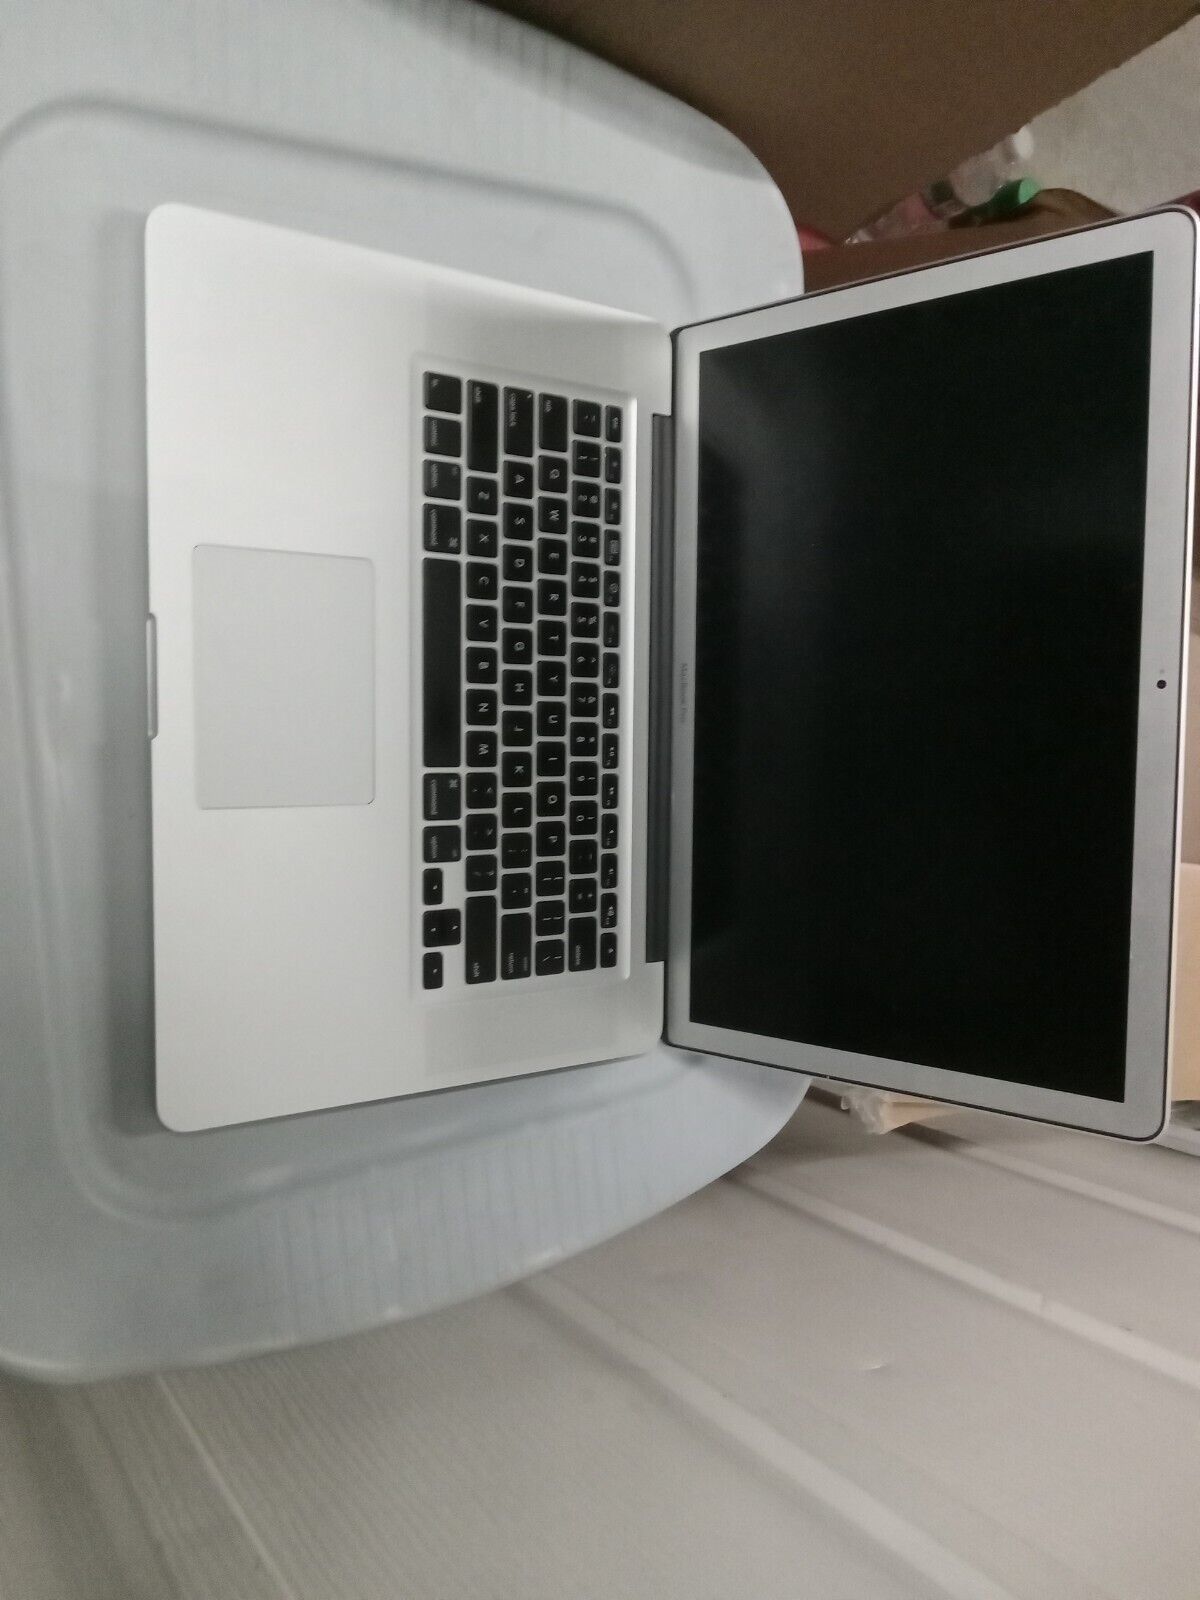 Primary image for Apple MacBook Pro A1285 for Parts or repair Doesn't Power On